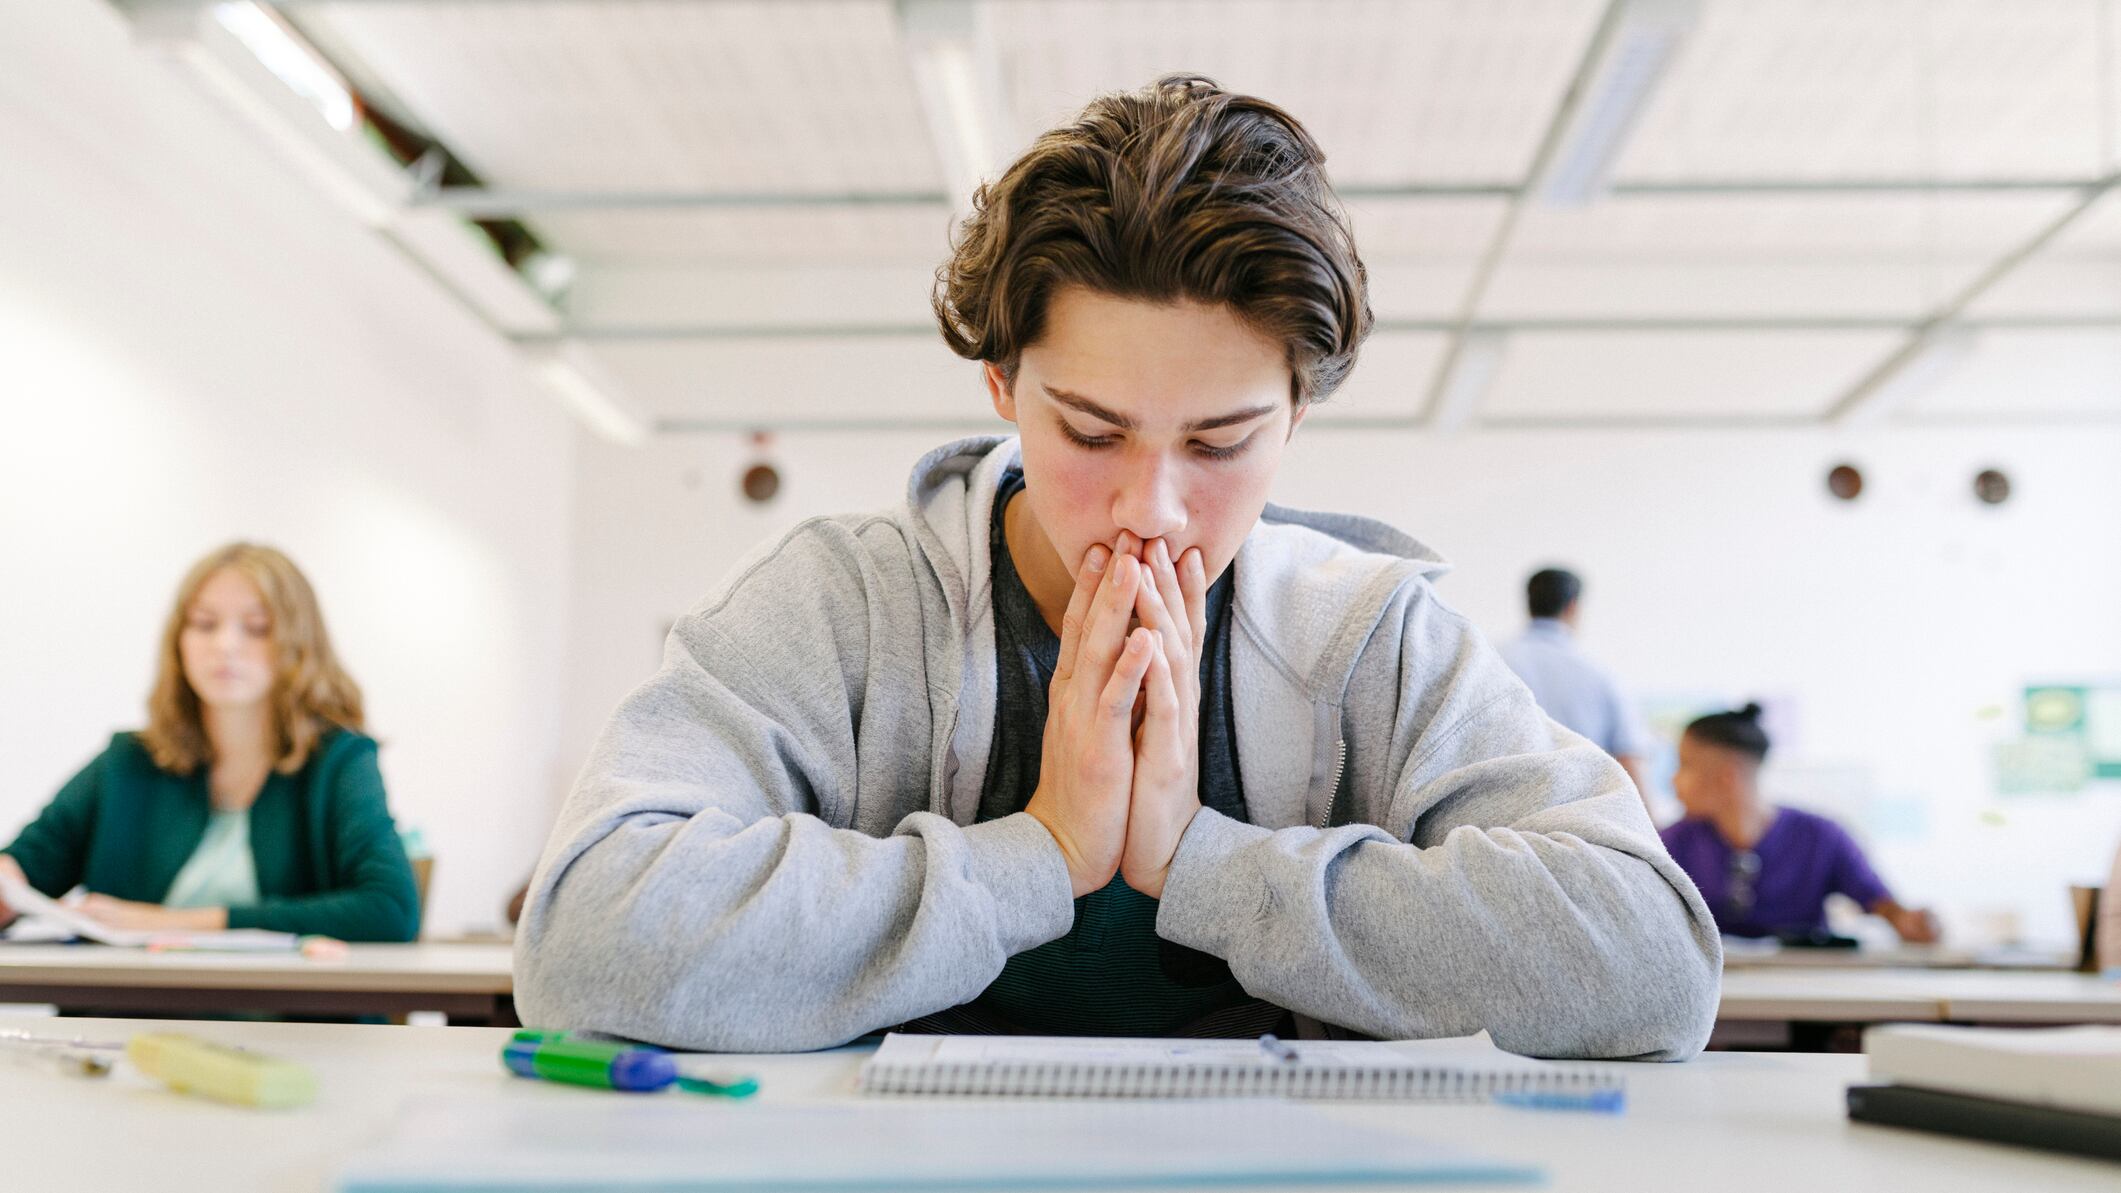 A student in a gray hoodie looks down at a paper exam. His hands are put together and resting against his chin and mouth.